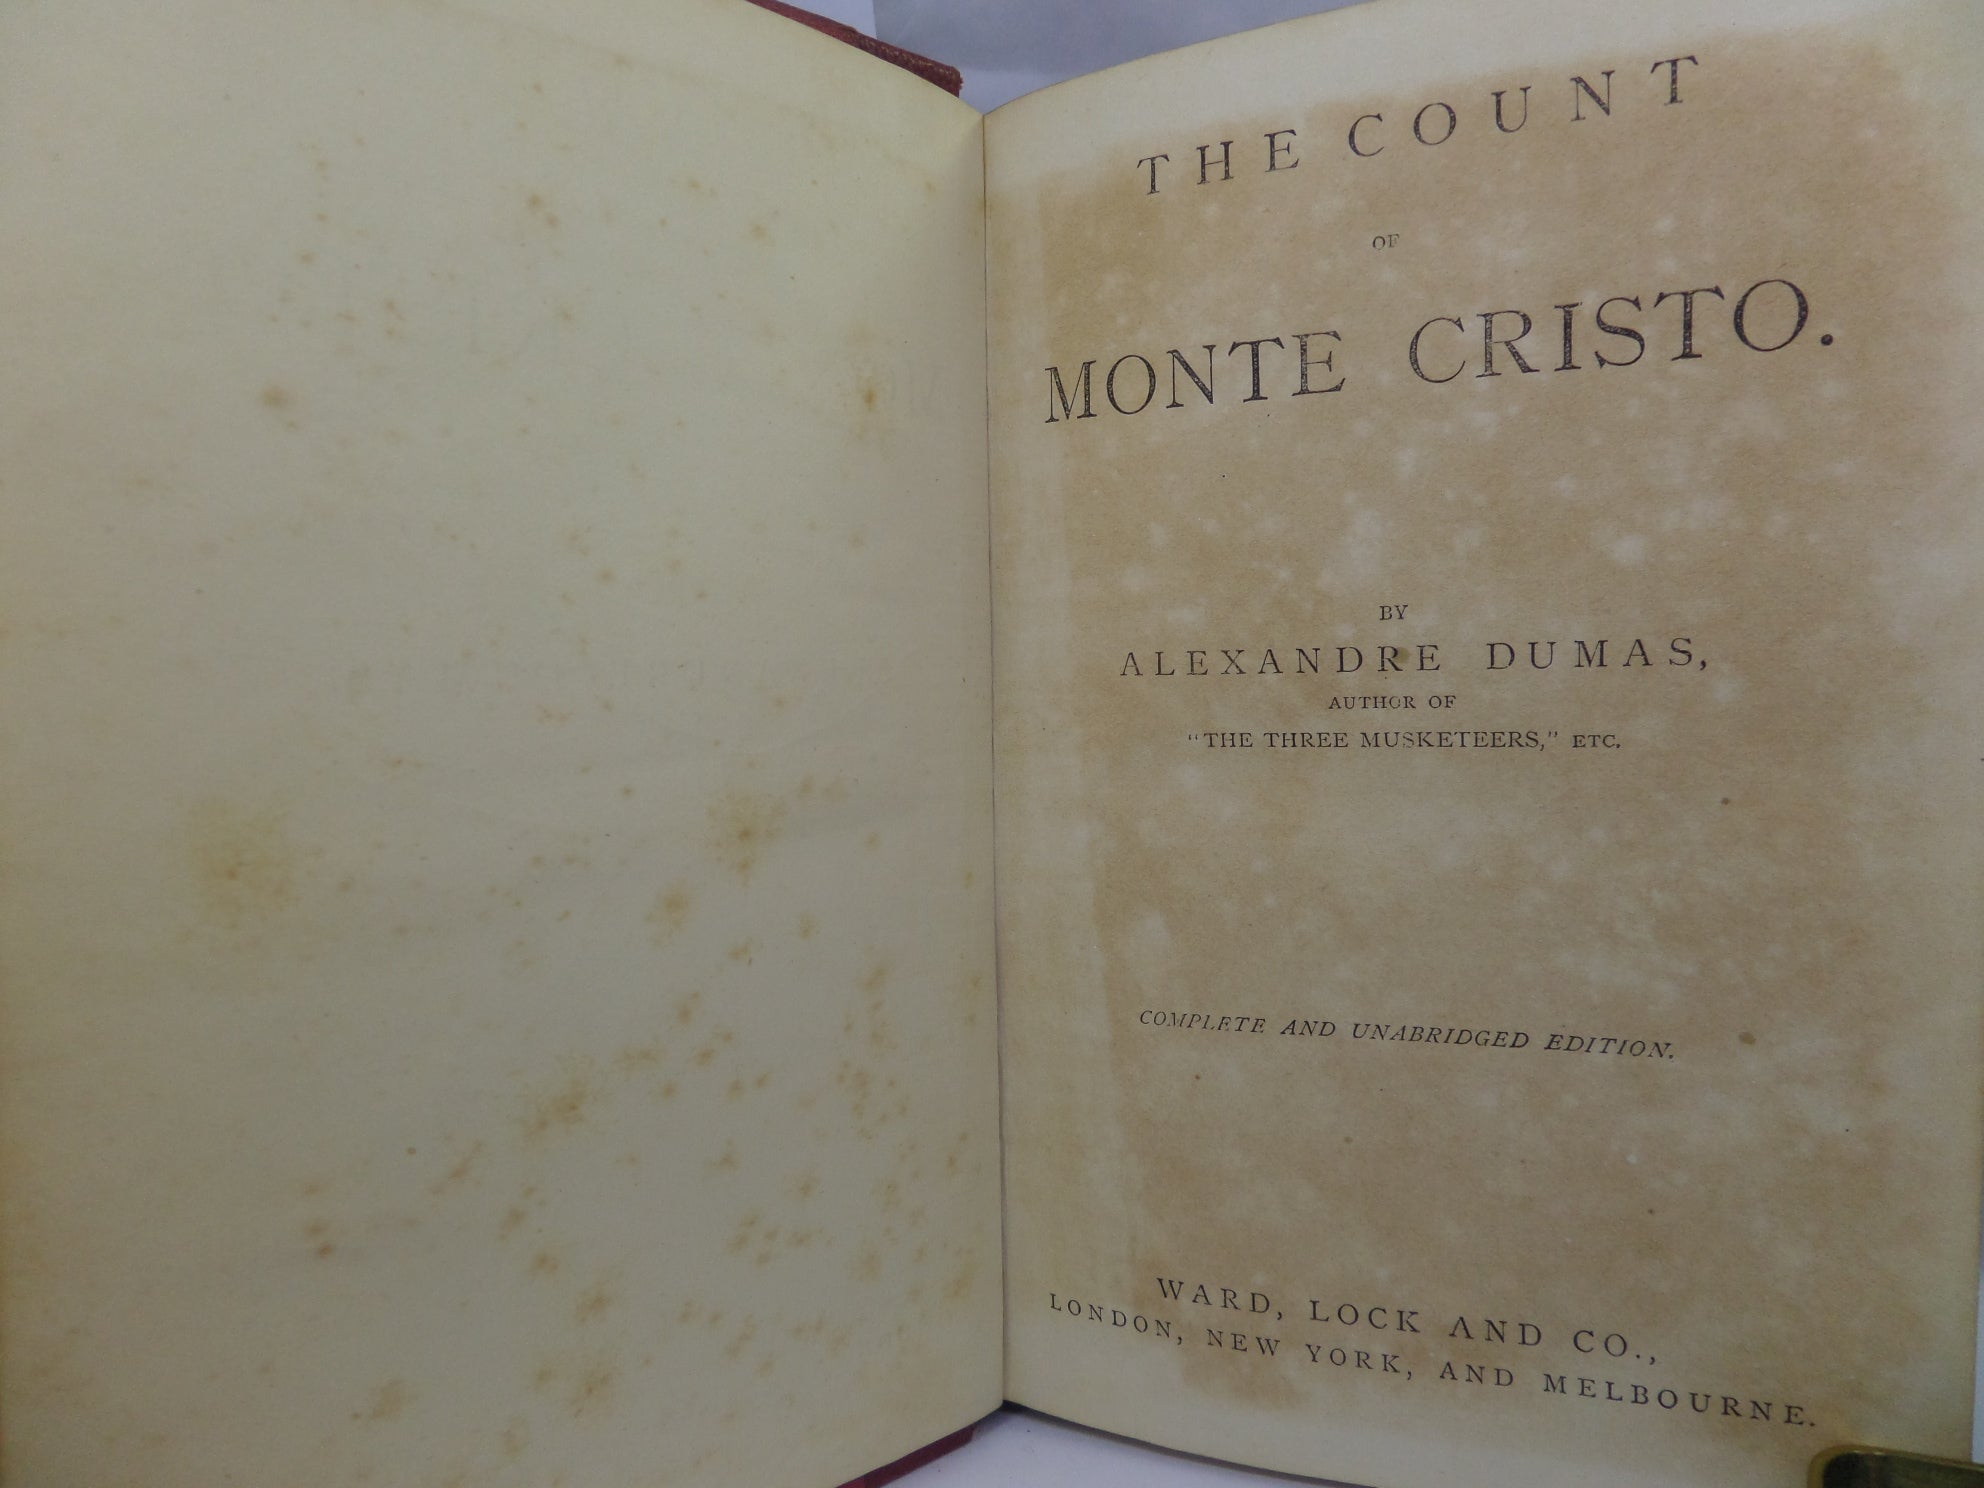 THE COUNT OF MONTE CRISTO BY ALEXANDRE DUMAS CA.1900 LEATHER BINDING